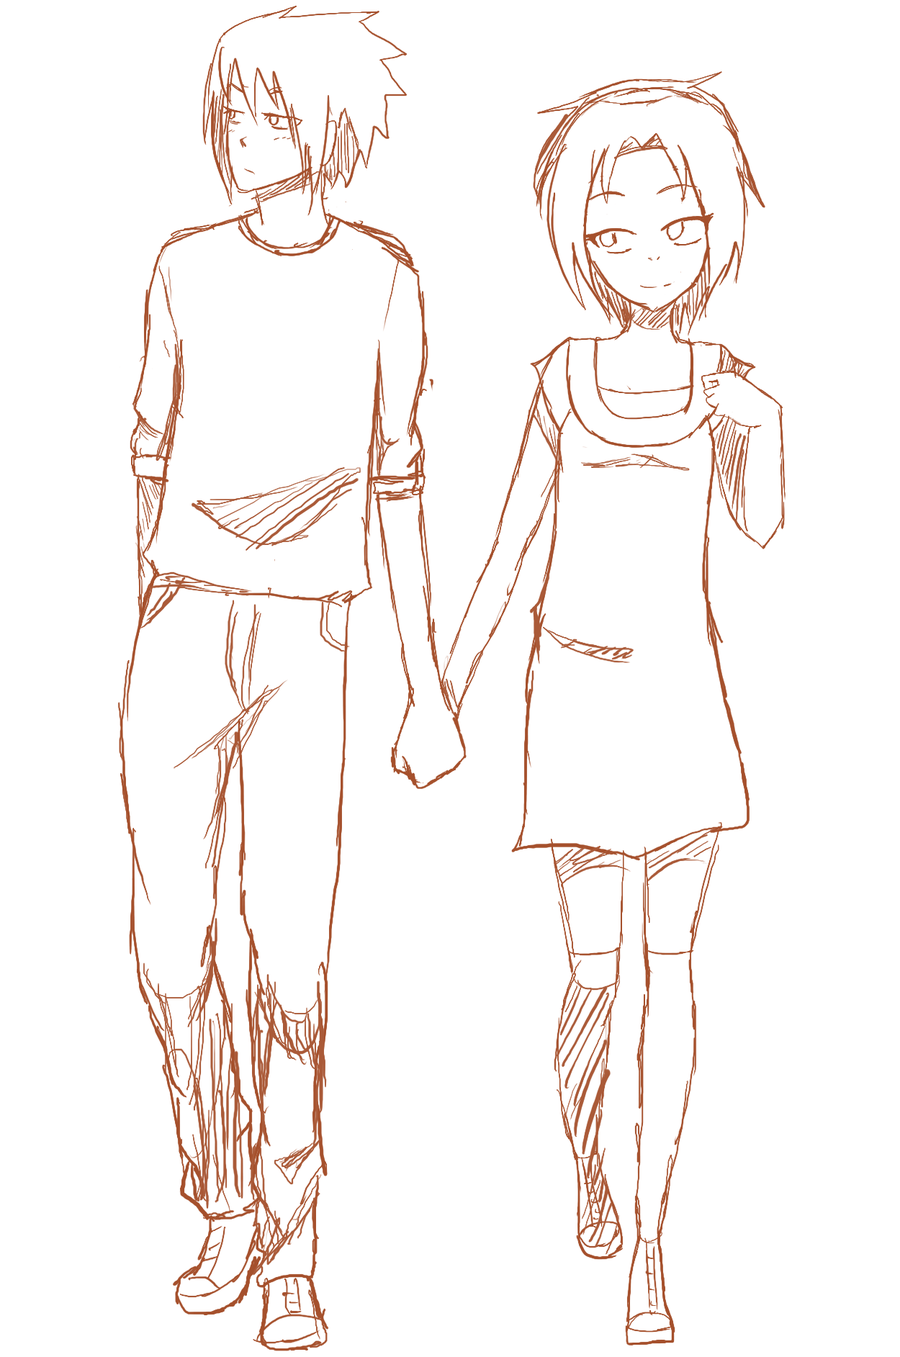 anime love holding hands drawing